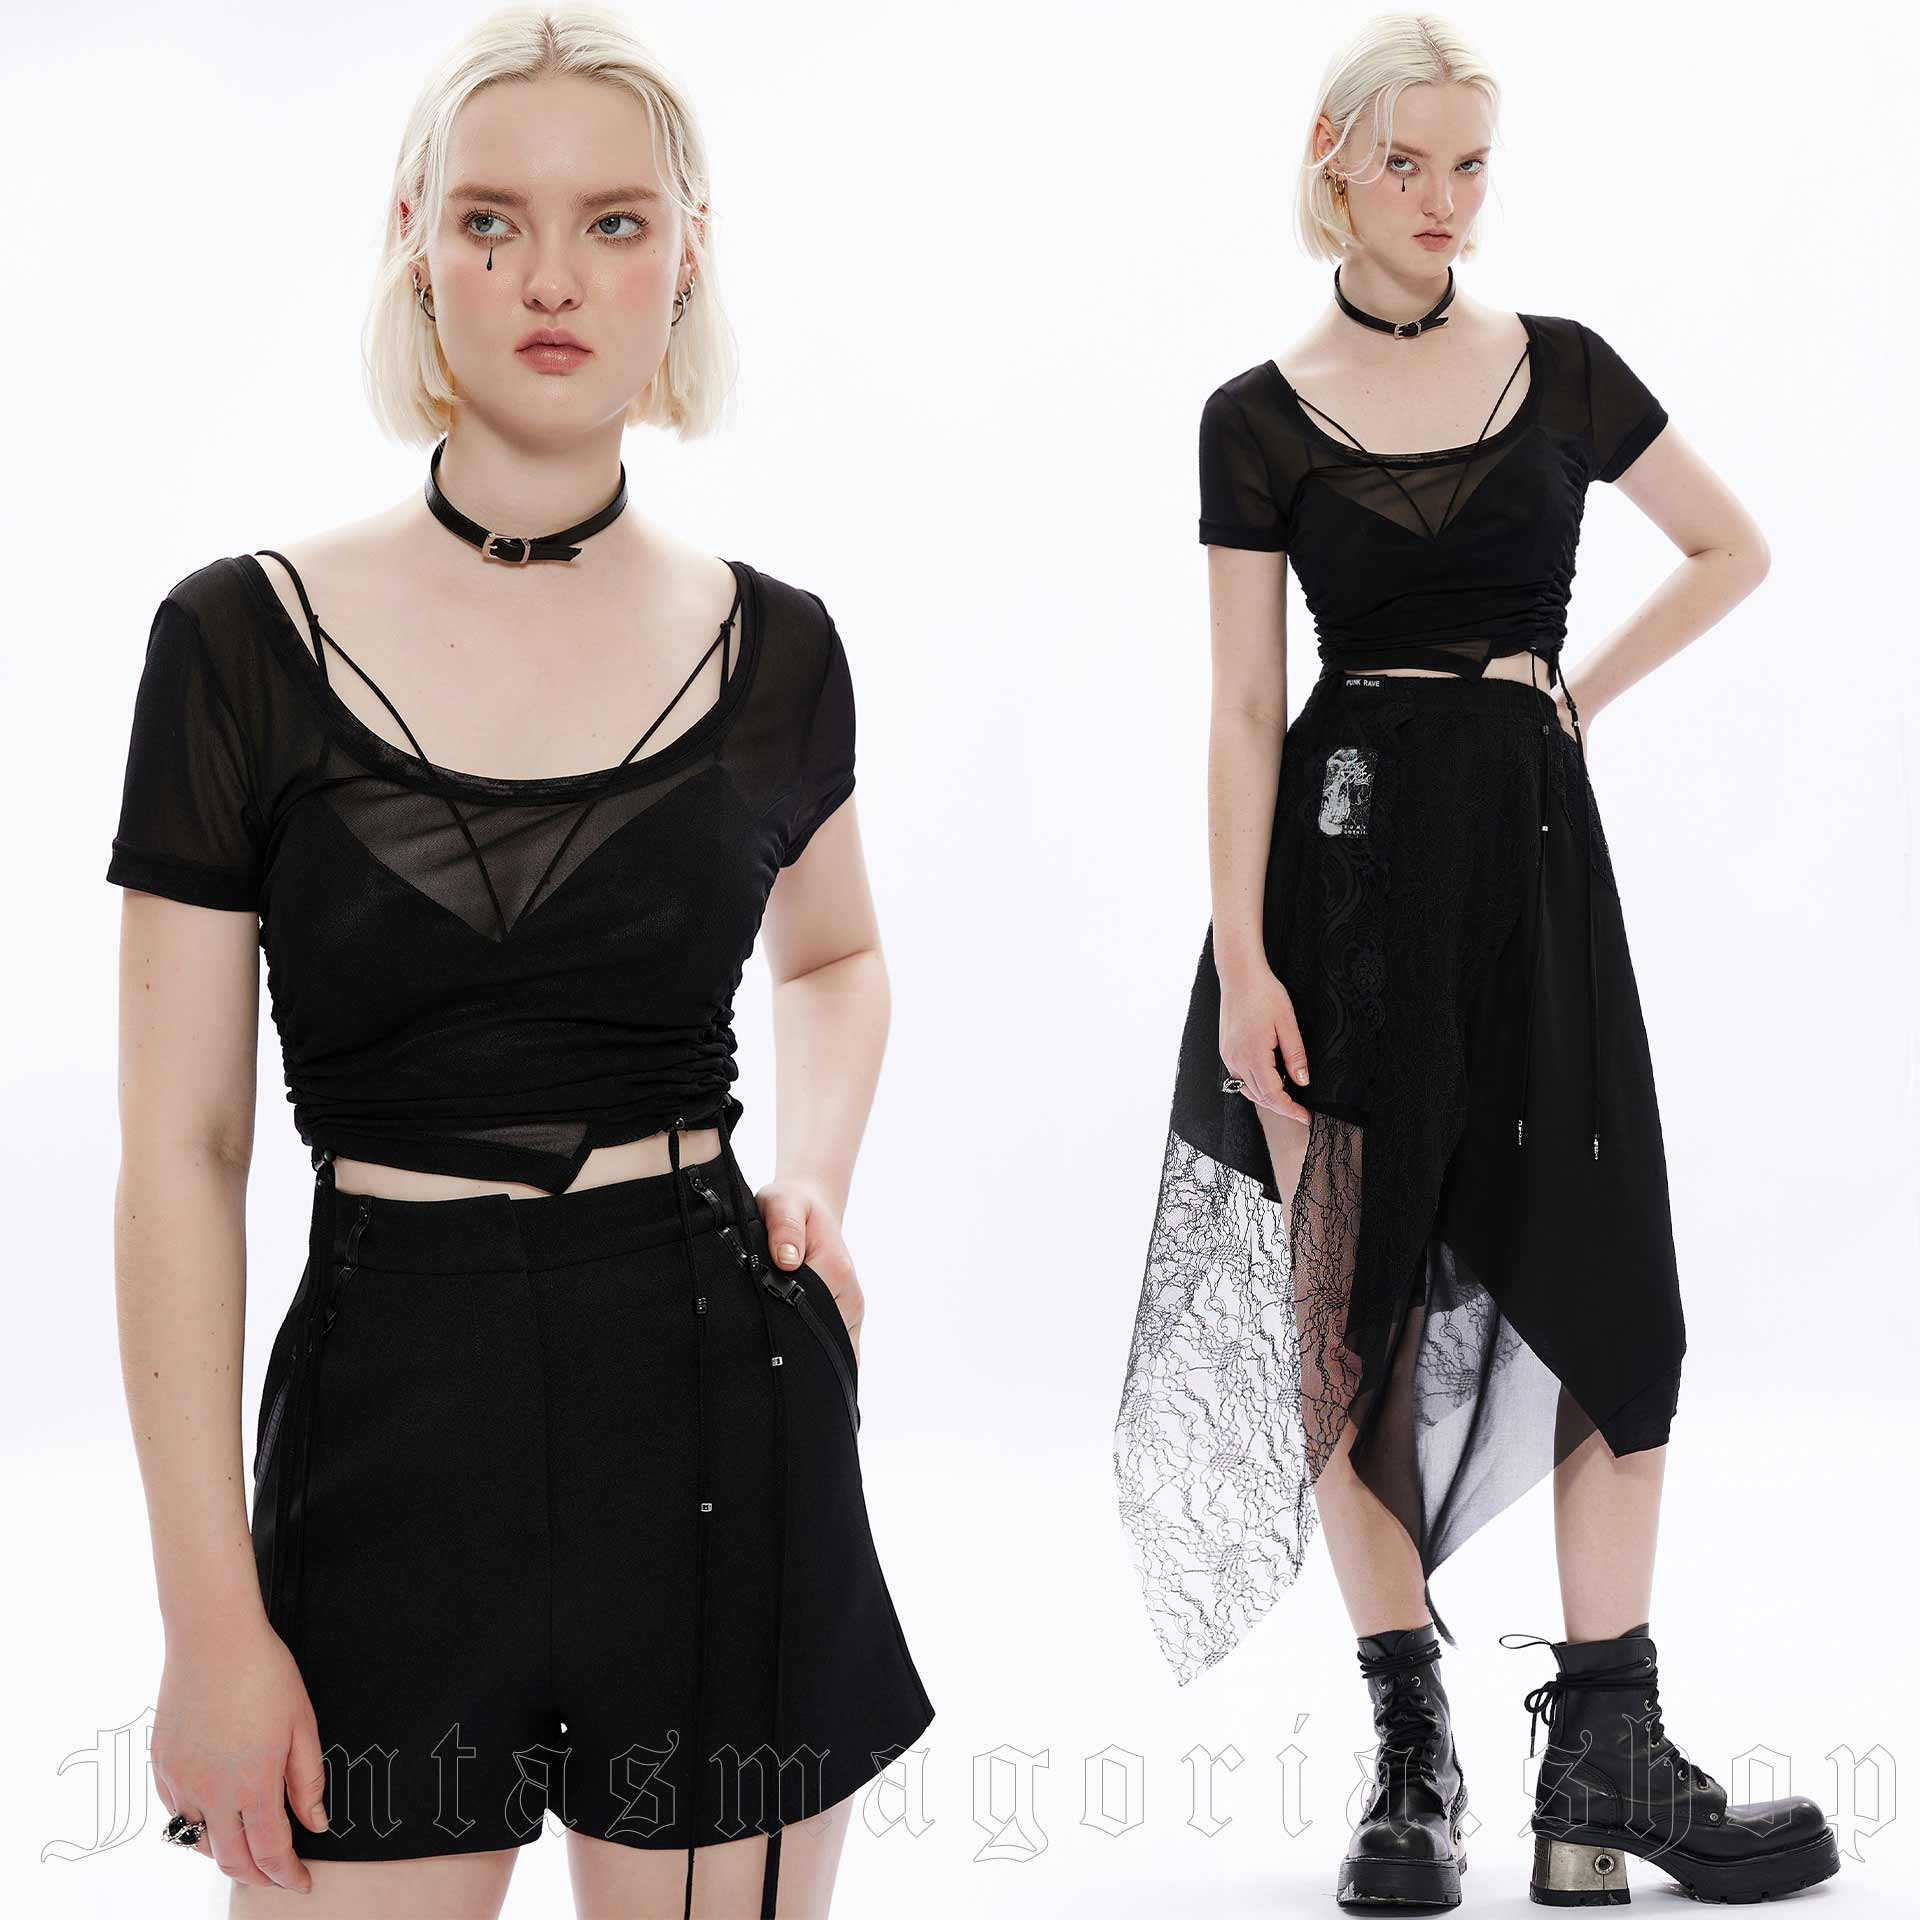 Visions Bleak Top by Punk Rave brand